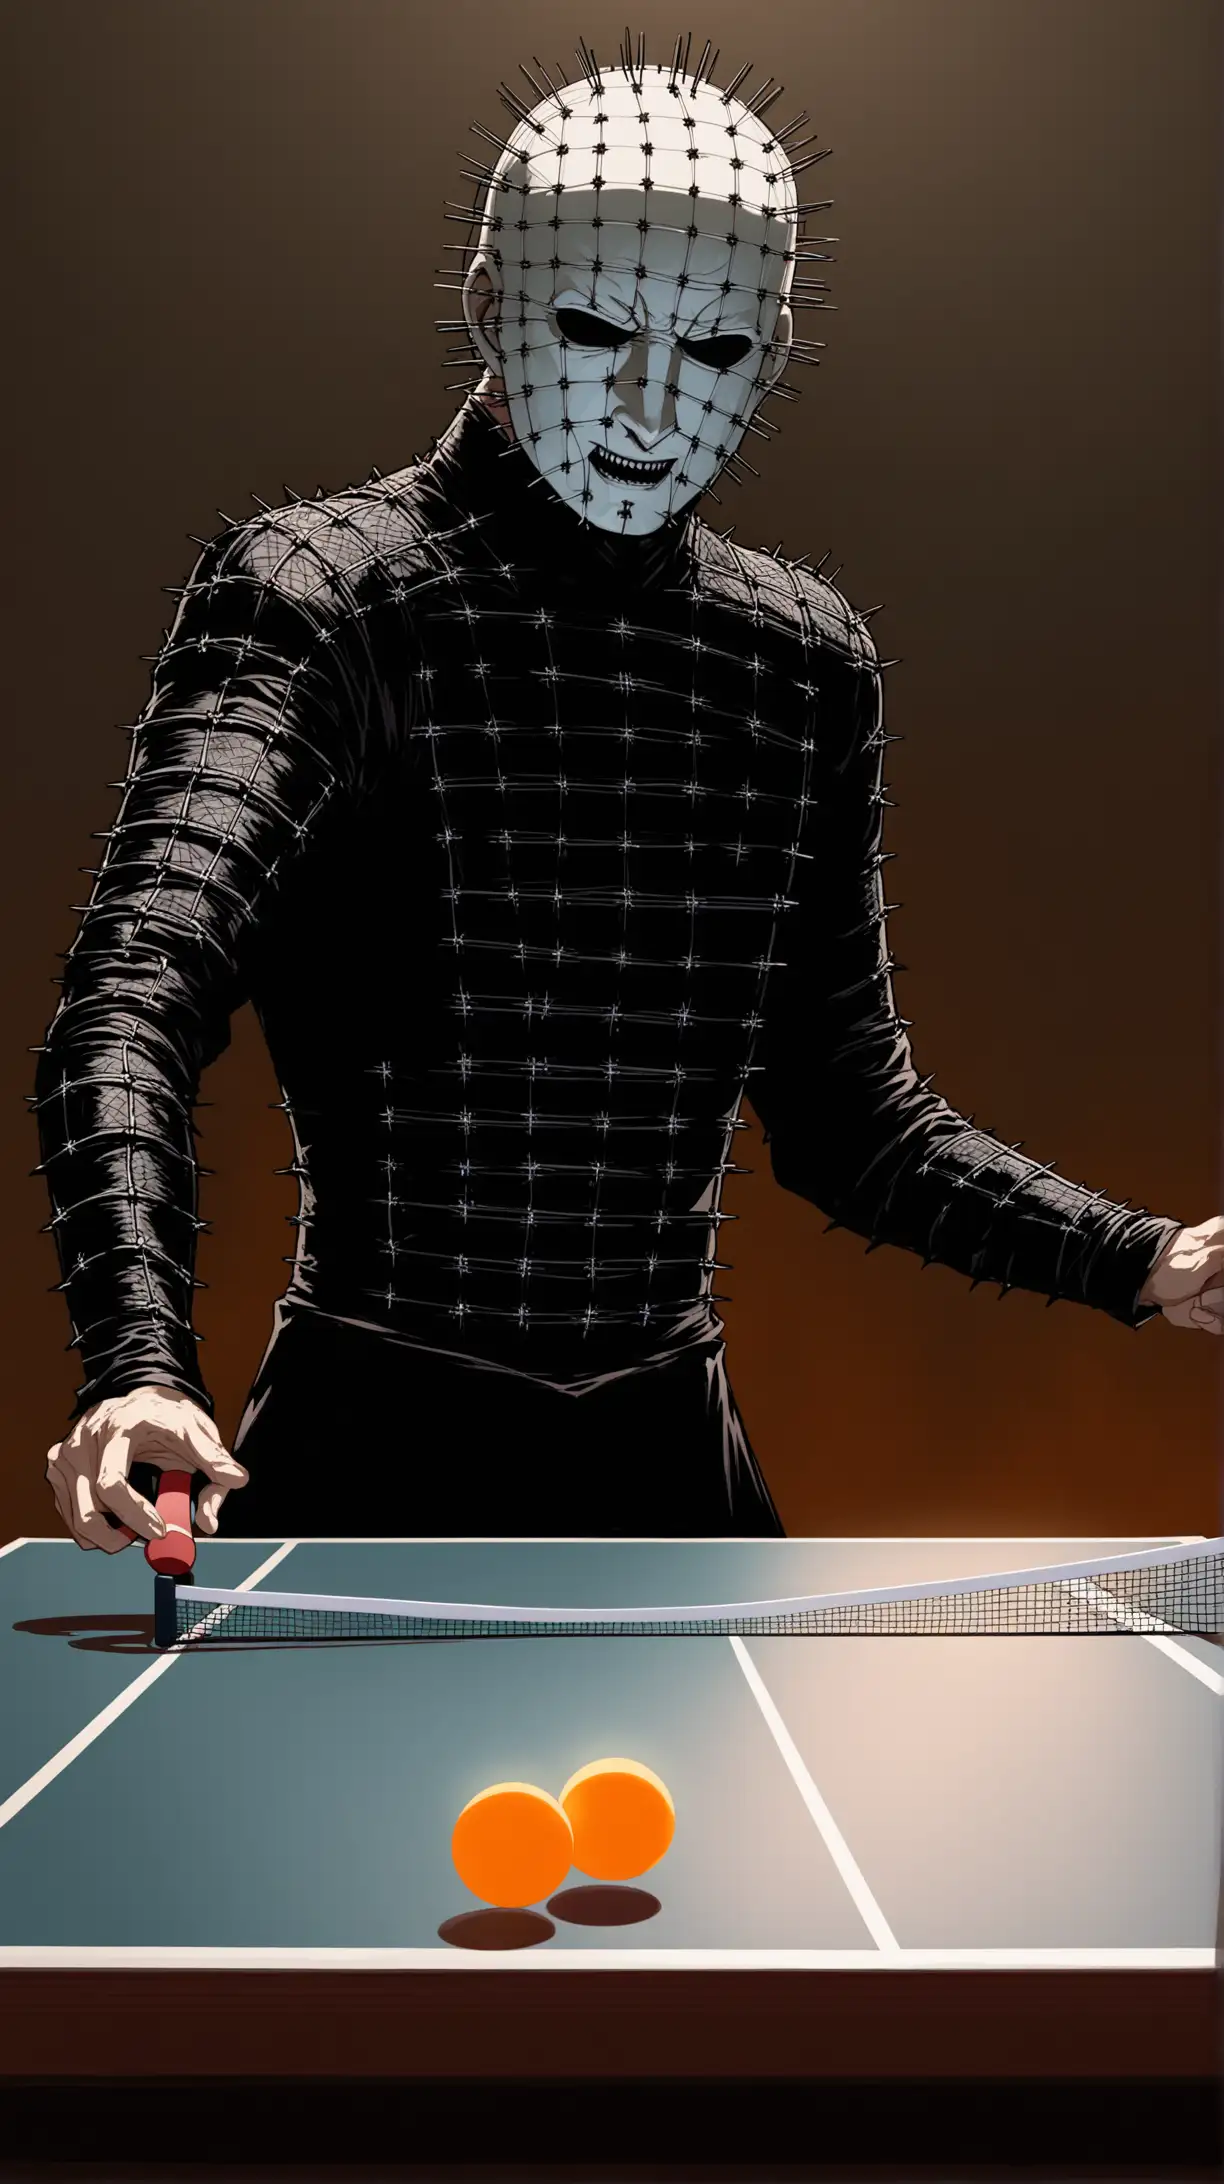 Energetic Hellraiser Engaging in Intense Ping Pong Match